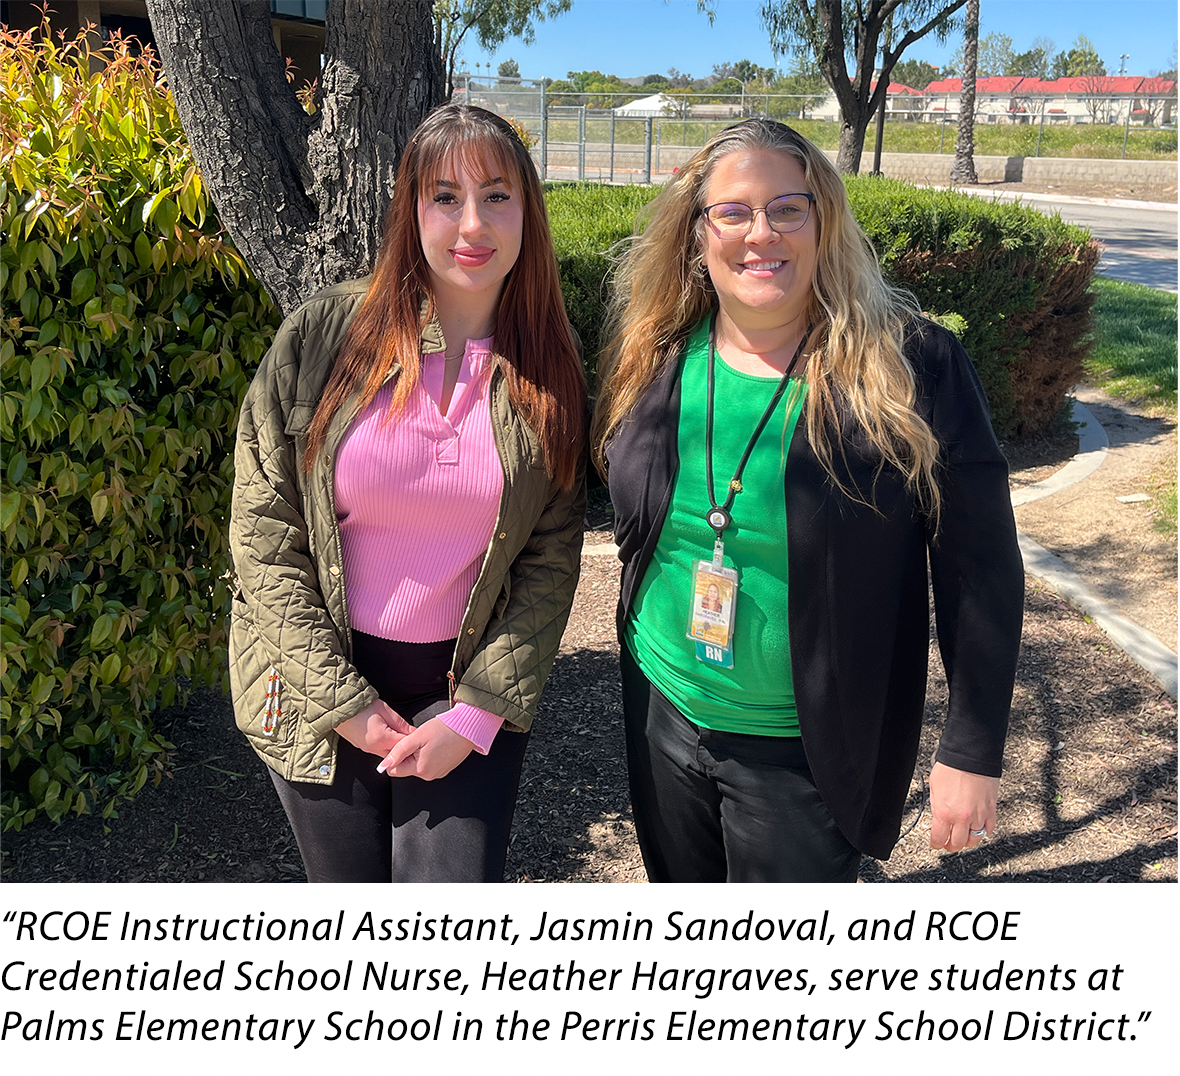 “RCOE Instructional Assistant, Jasmin Sandoval, and RCOE Credentialed School Nurse, Heather Hargraves, serve students at Palms Elementary School in the Perris Elementary School District.”